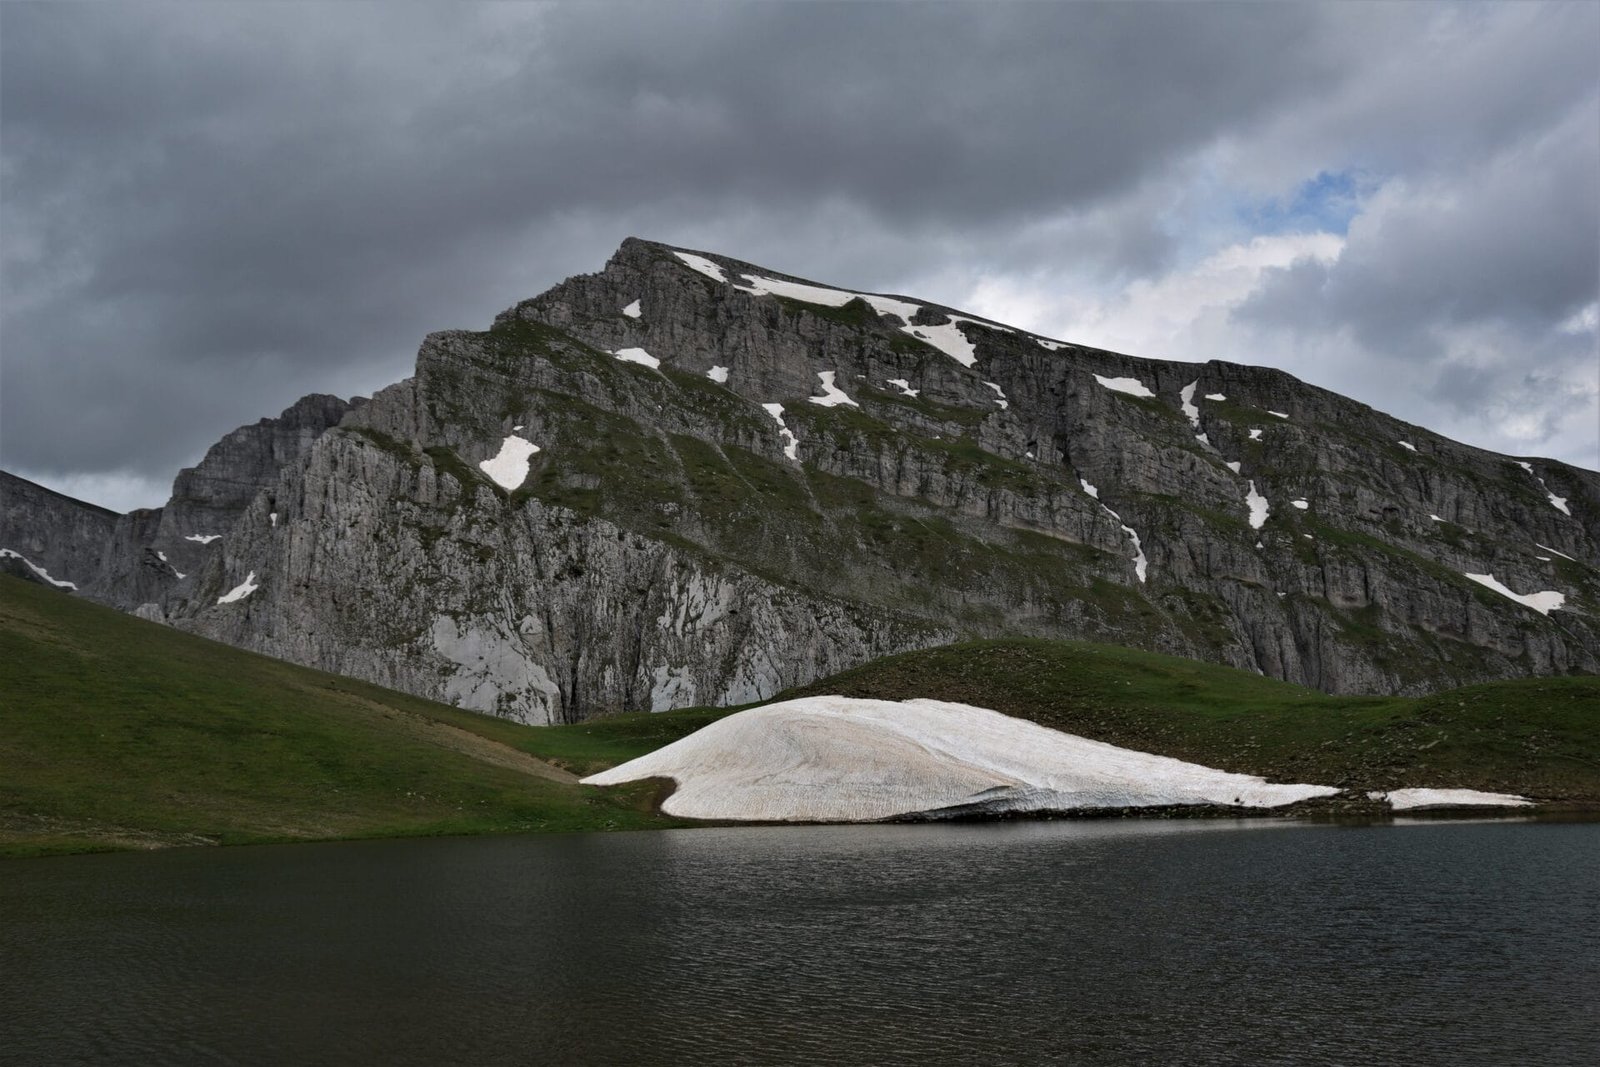 an imposing peak looms over an alpine mountain lake surrounded by green meadows and a left-over snowfield